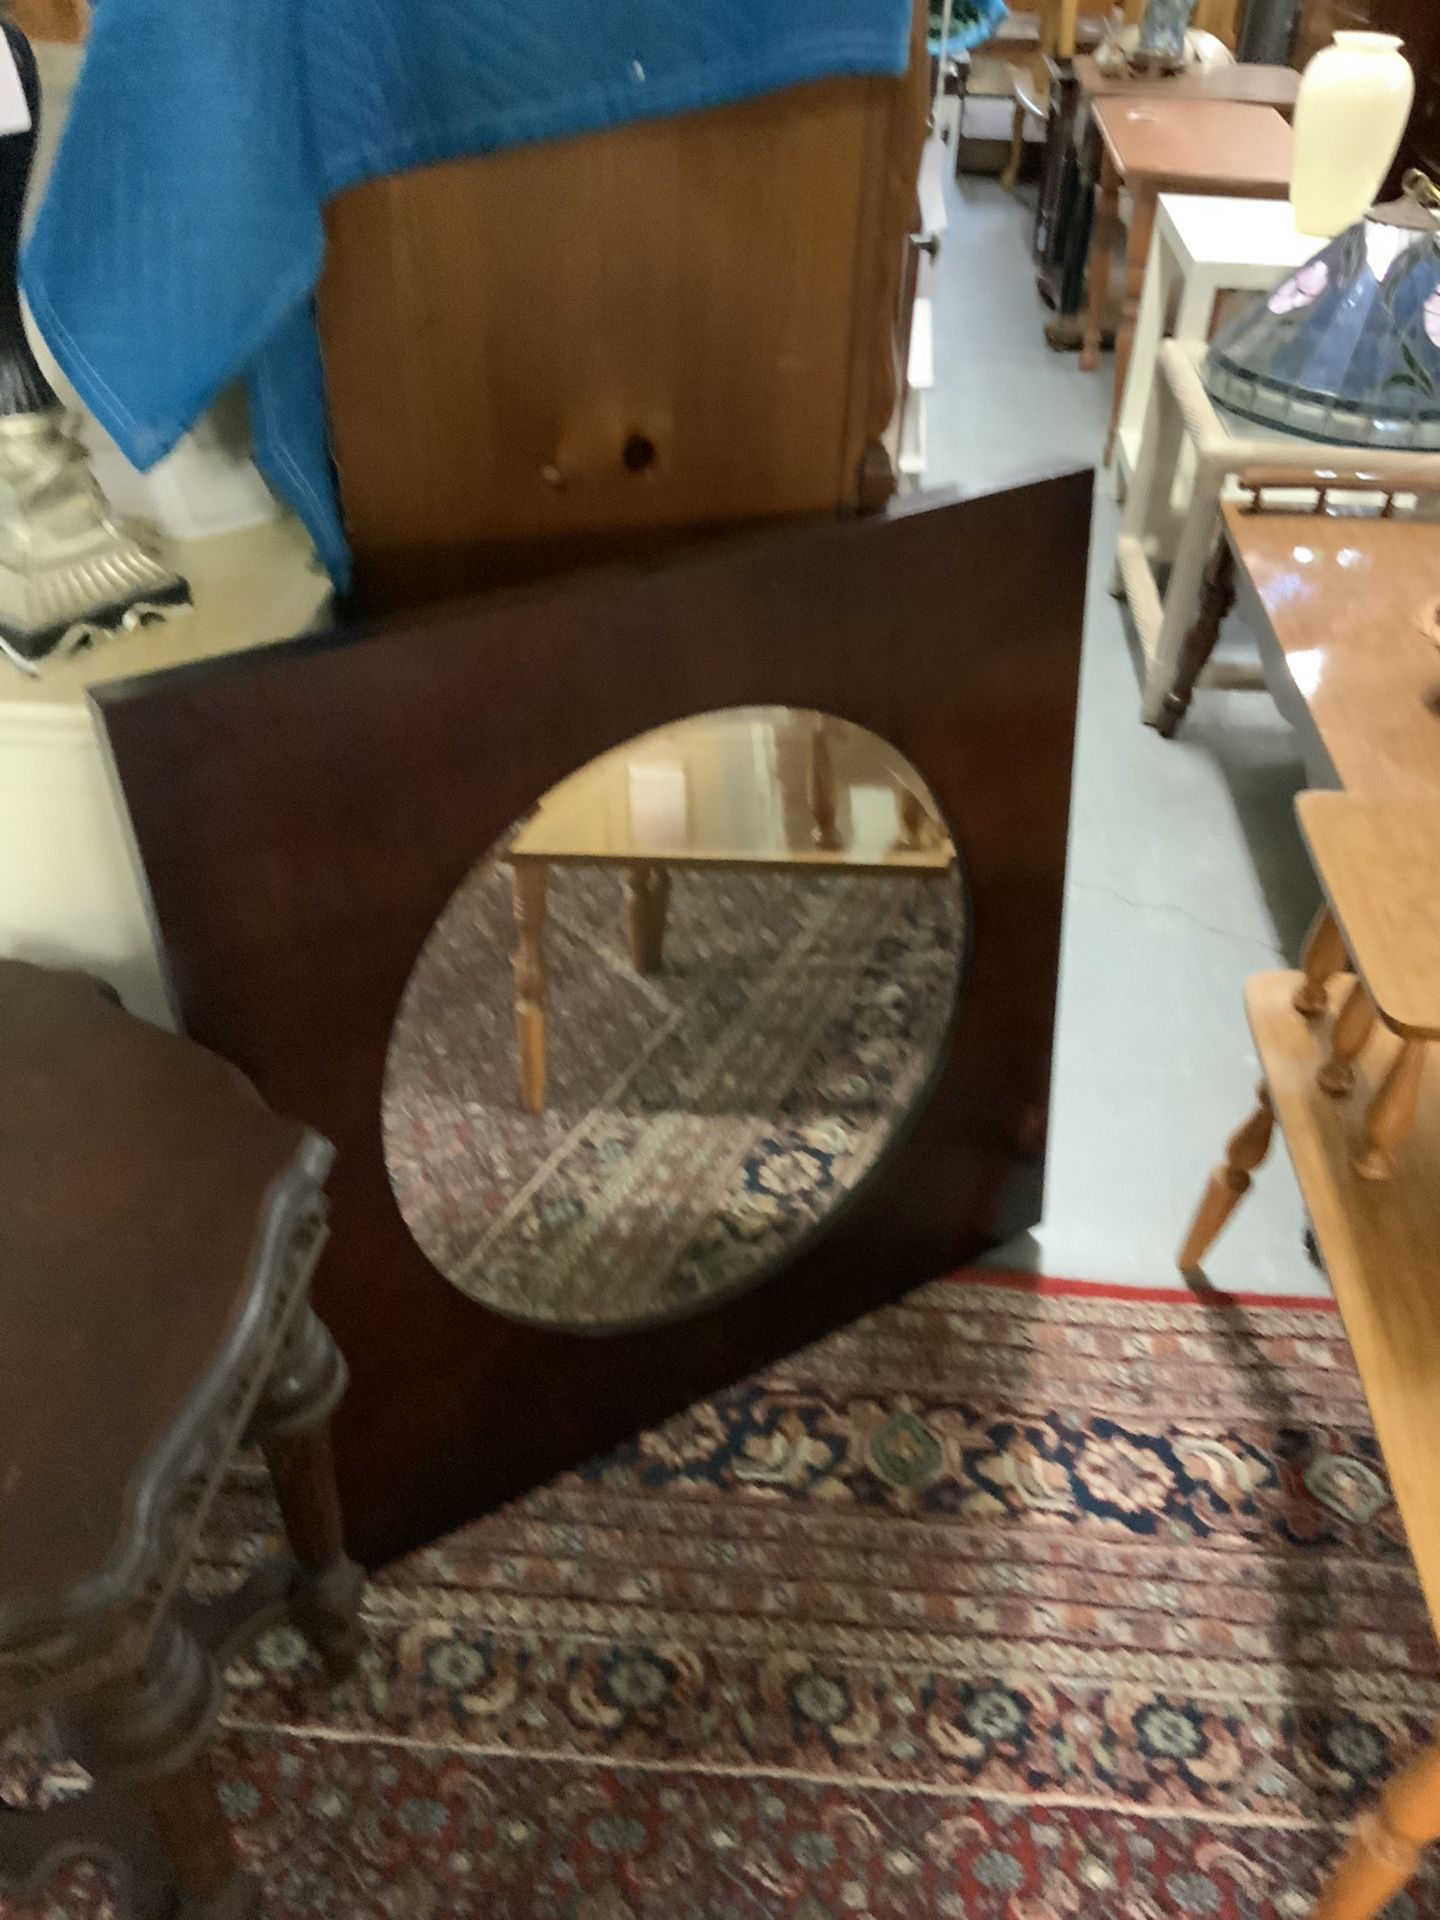 Wall mirror (30% off price listed)